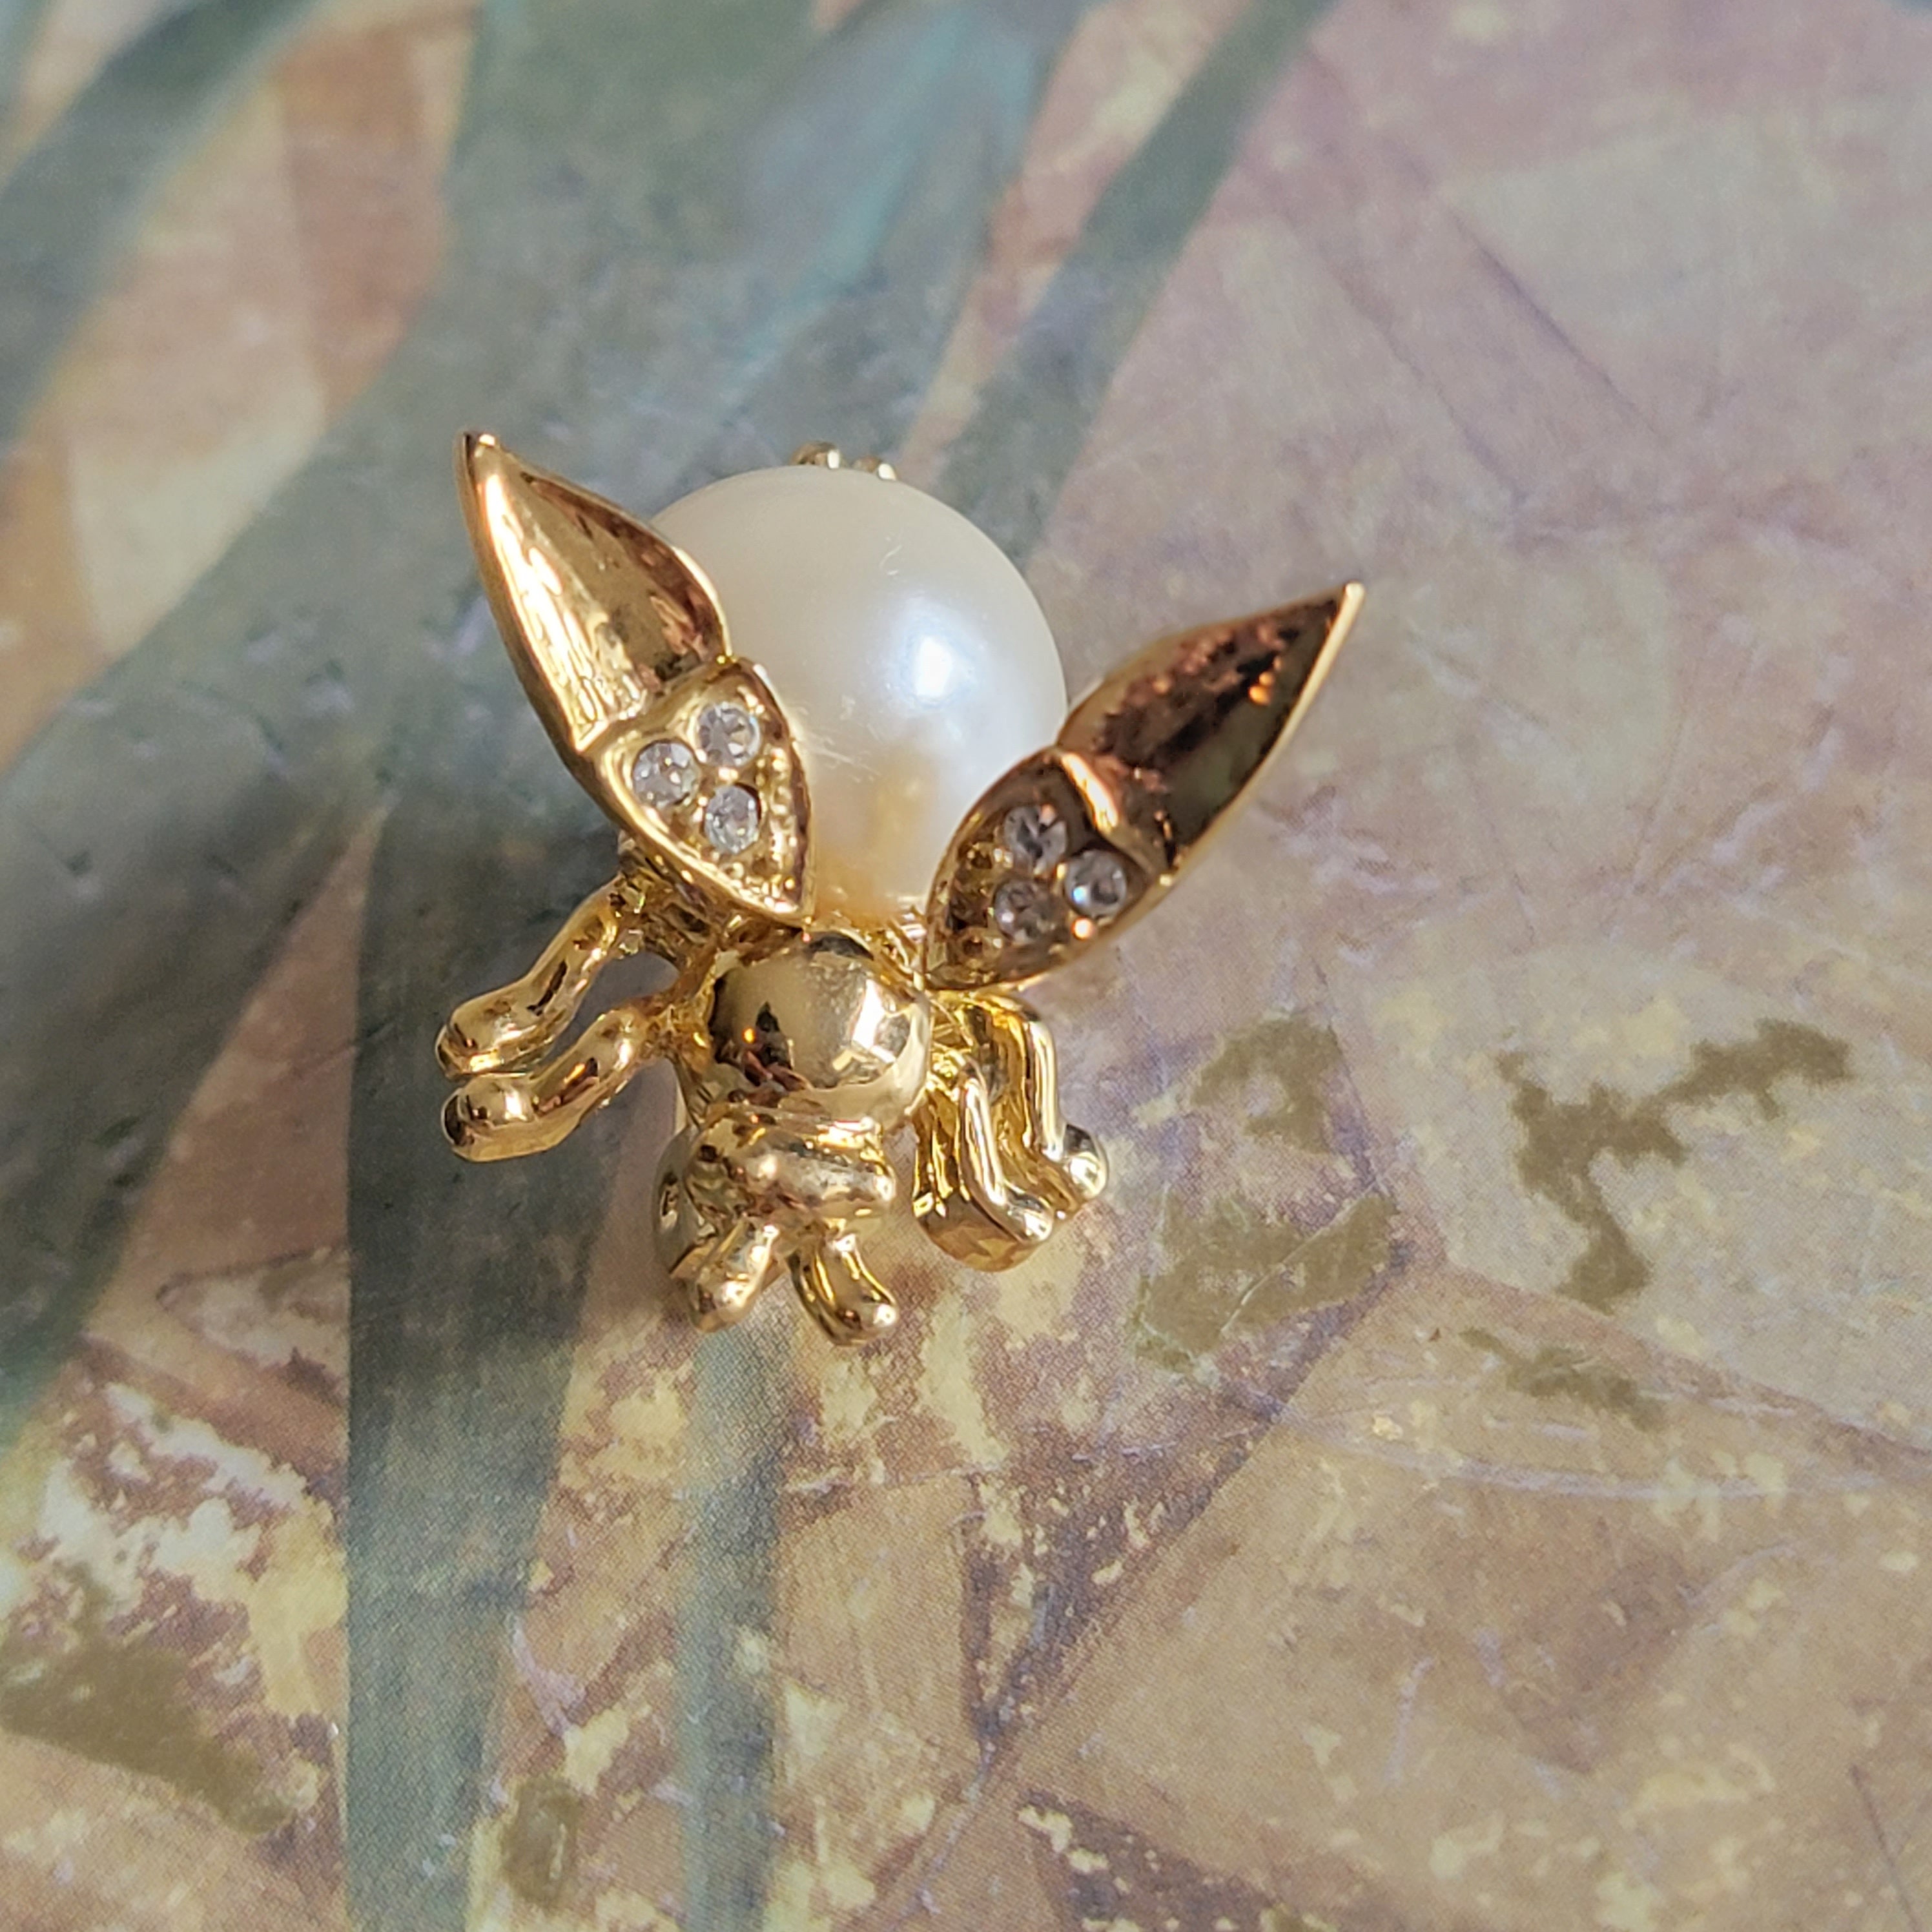 Wholesale Designer Bees Bee Brooch Vintage With Luxury Pearl And Shining  Crystal For Womens Fashion Coat Jewelry From Factorystore2016, $5.78